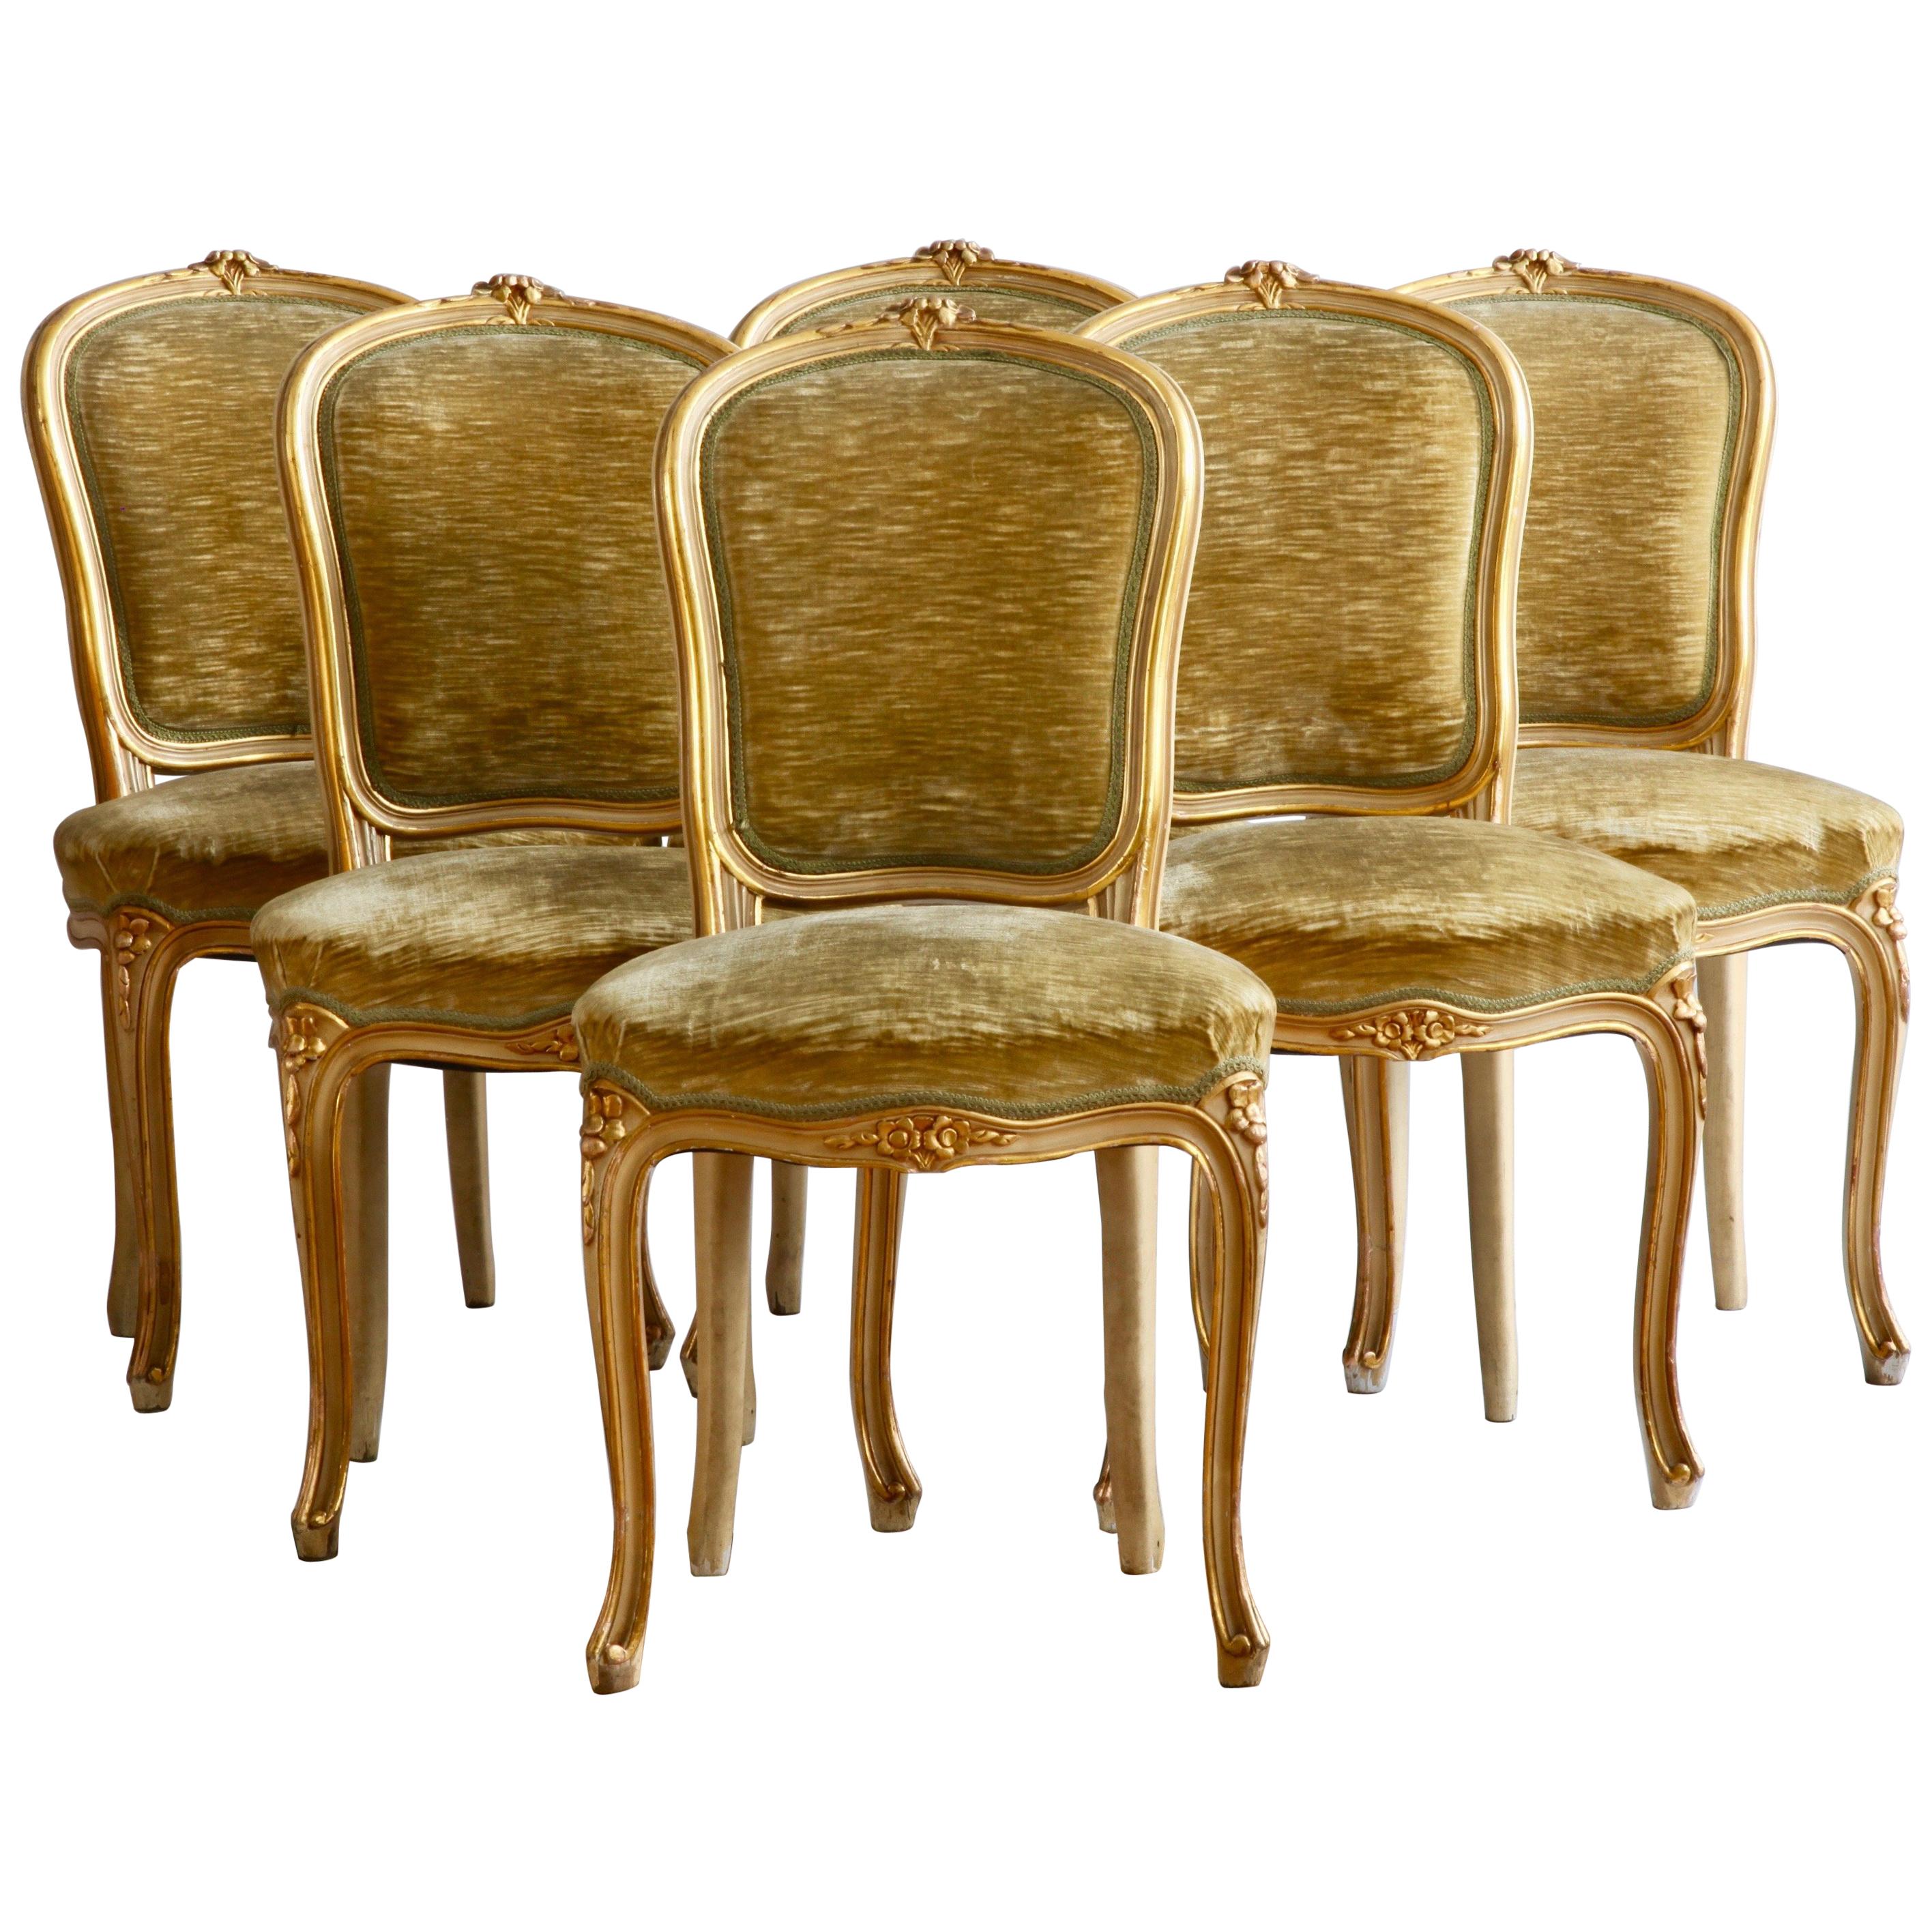 Set of 6 Matching Louis XV Style Chairs, with Gilded Highlights